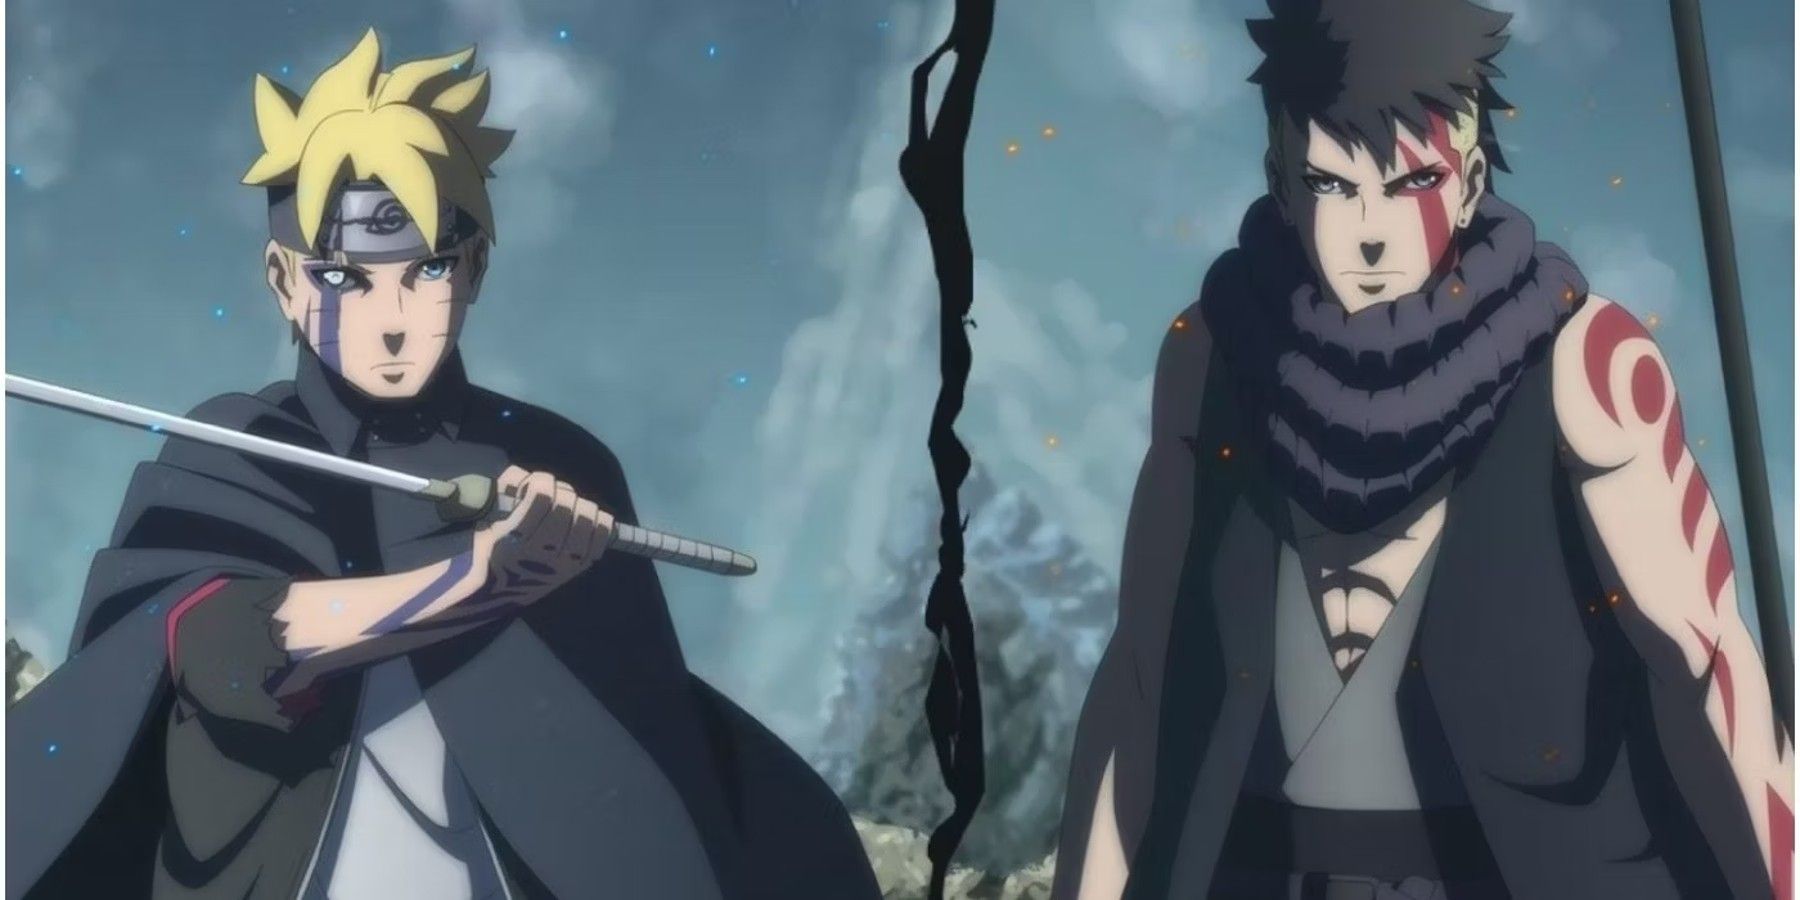 Boruto Anime Announces End of Part 1 This March